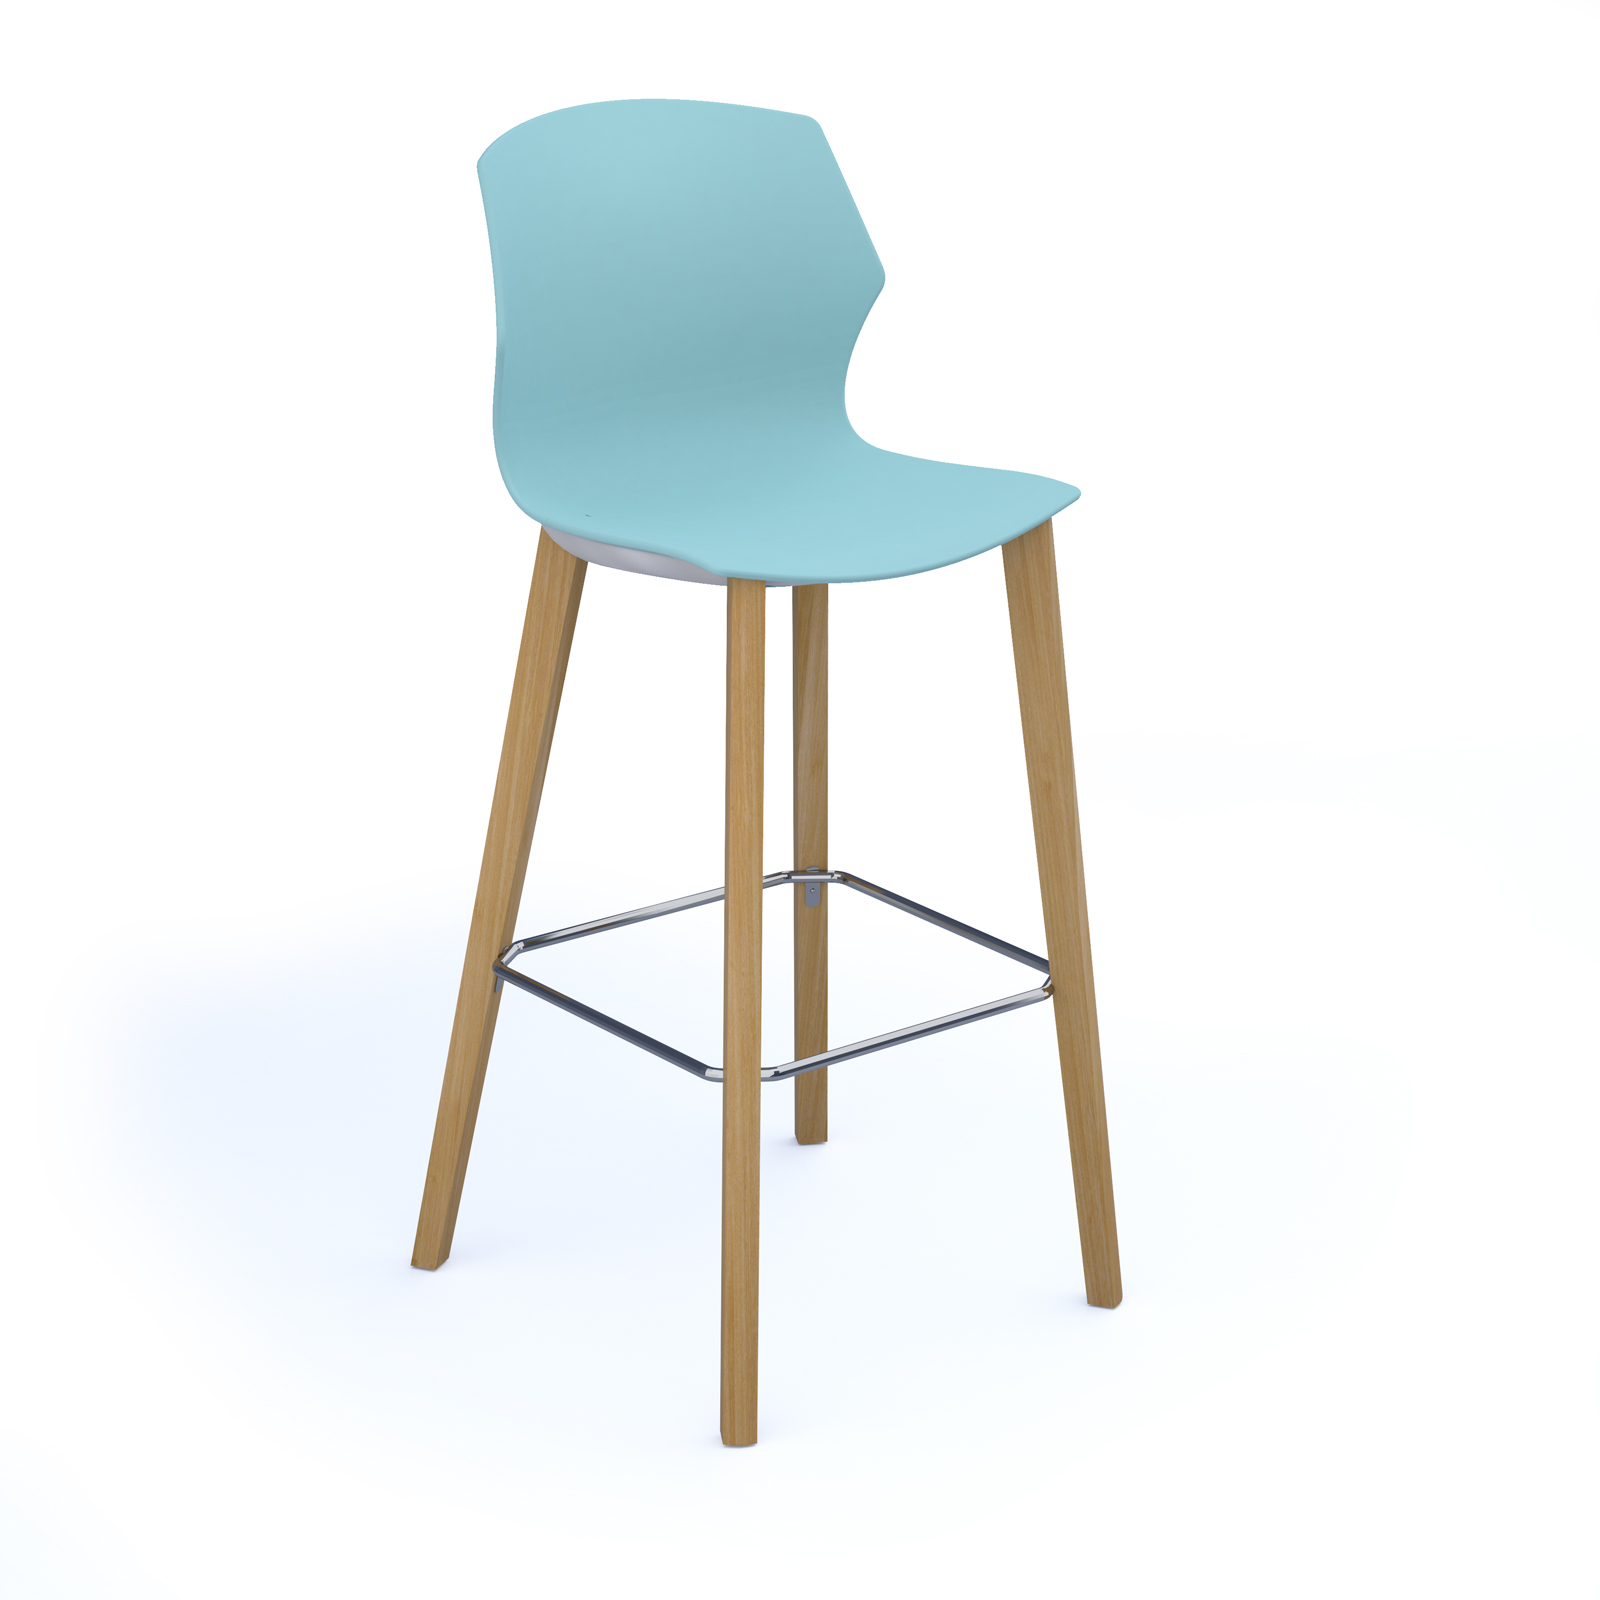 Roscoe high stool with wooden legs